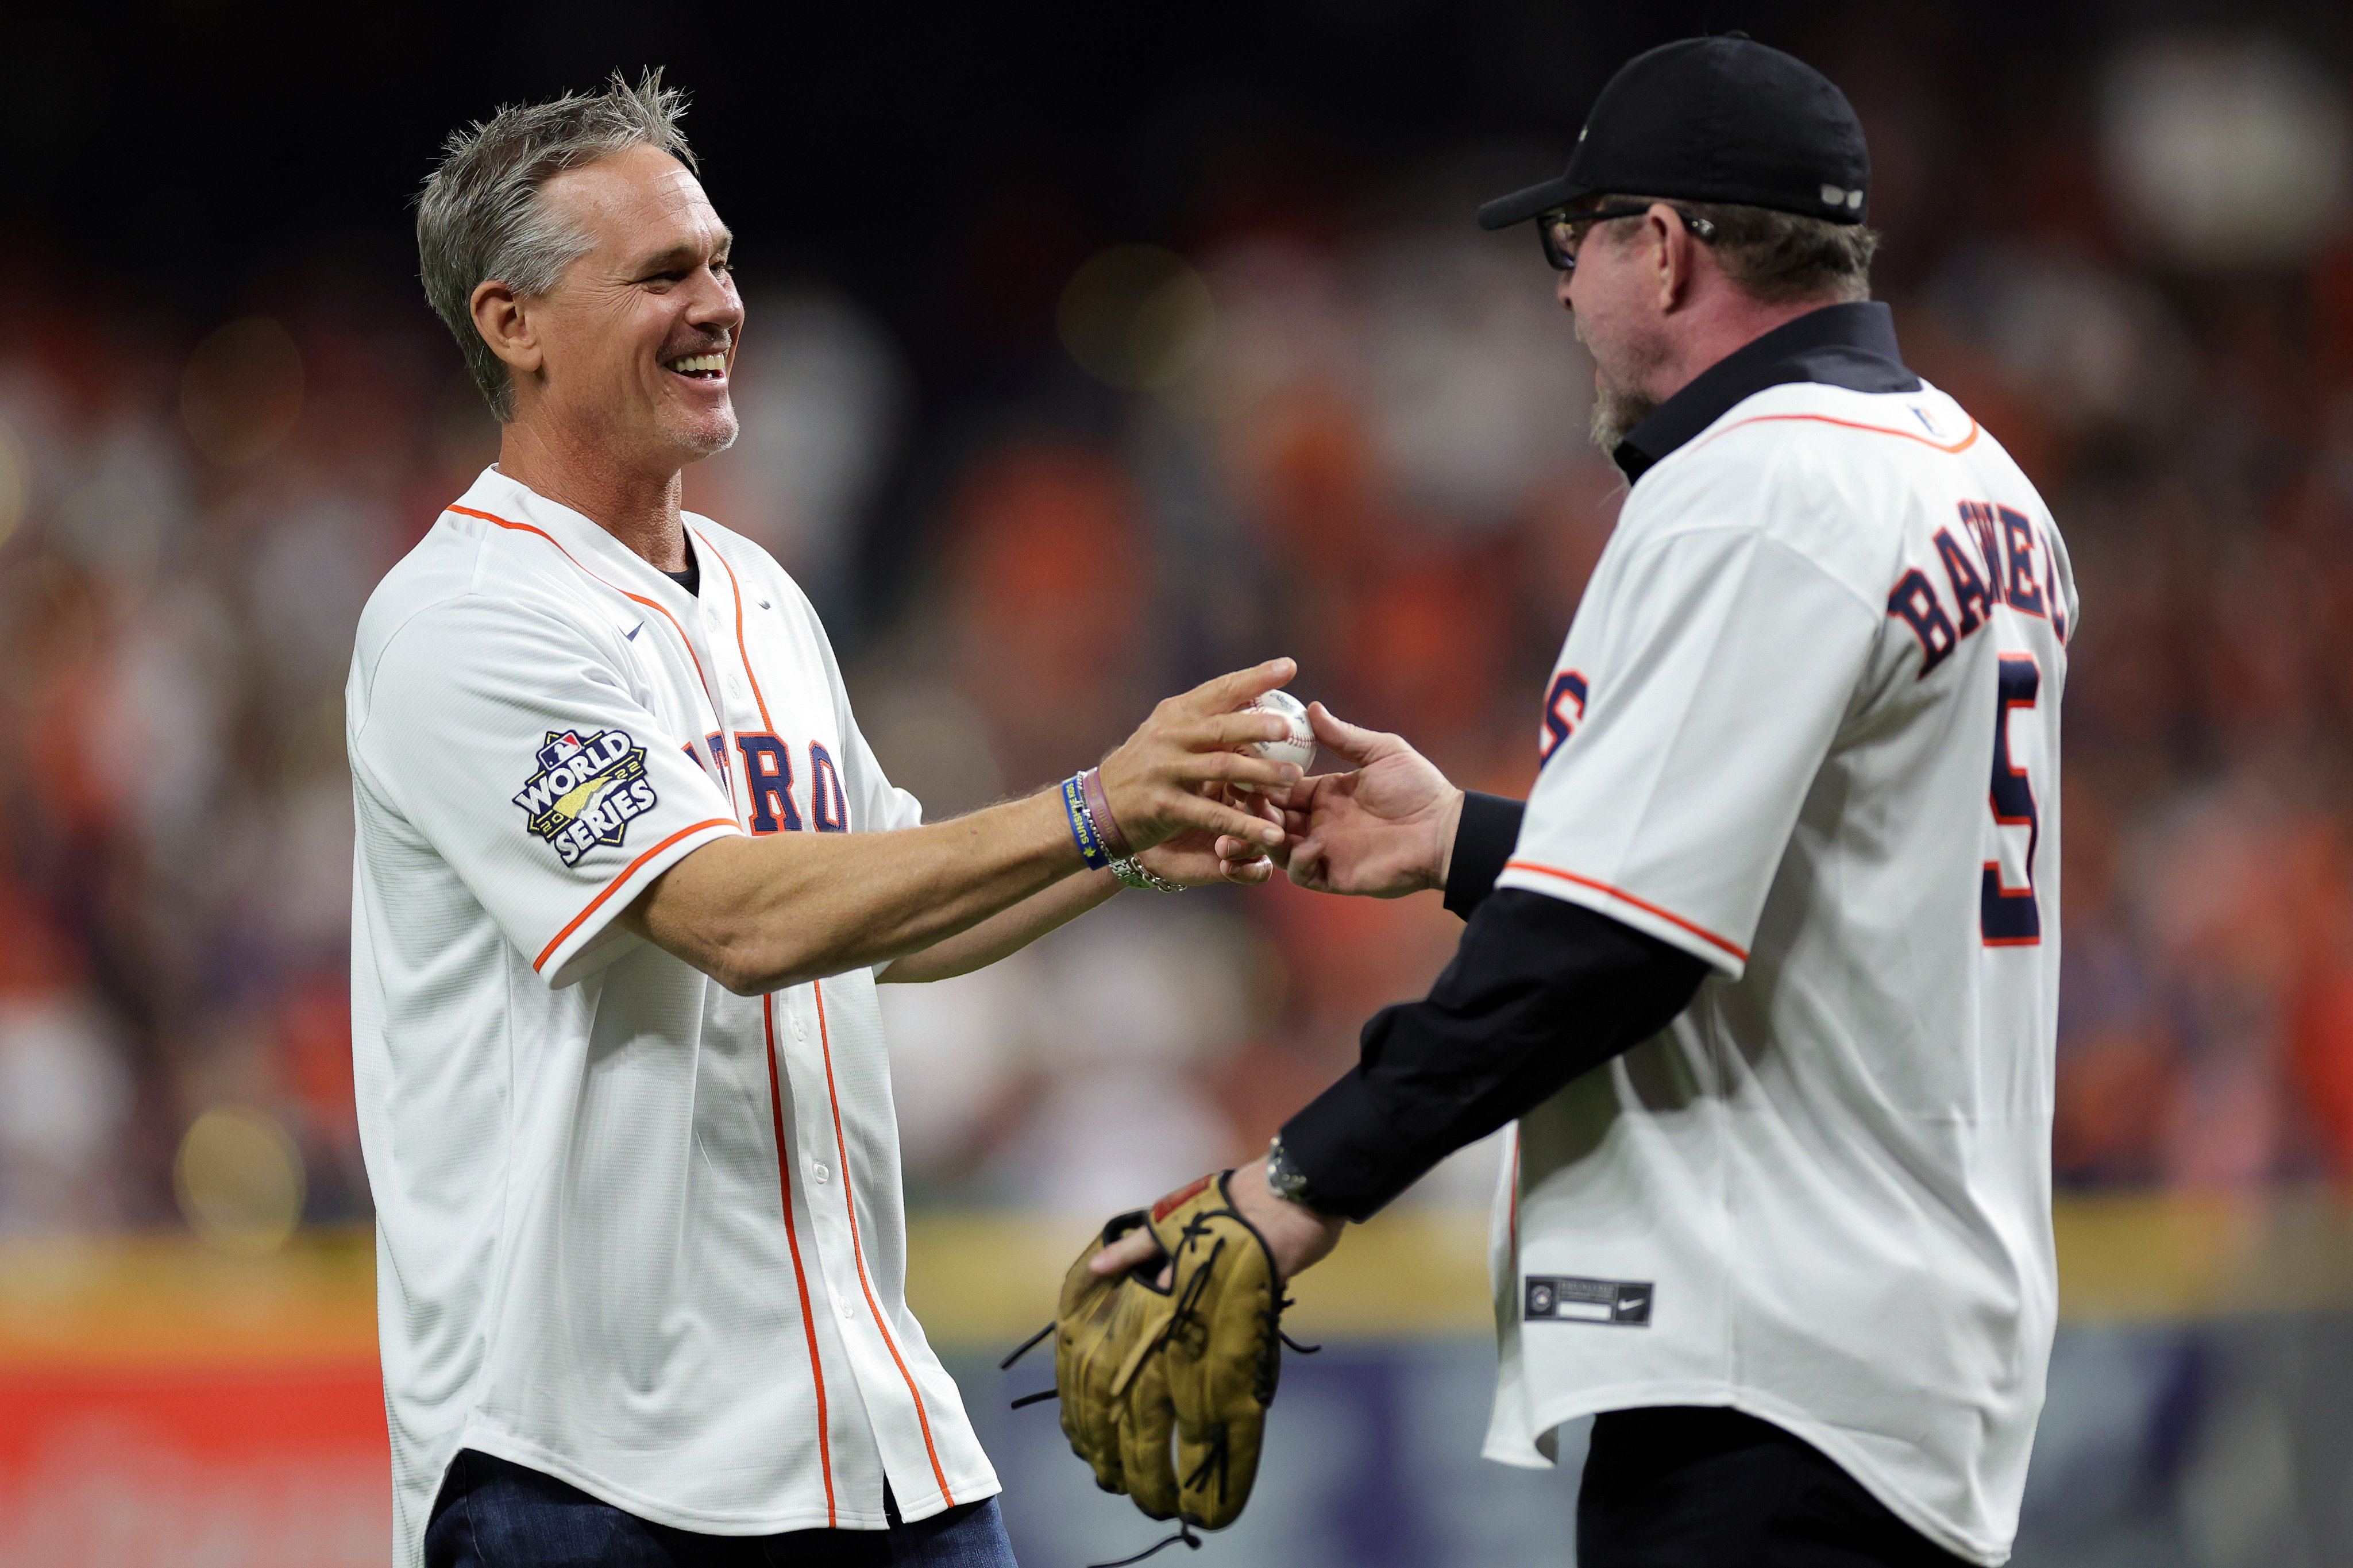 FOX Sports: MLB on X: Houston @astros legends Craig Biggio and Jeff Bagwell  throw out the first pitch before #WorldSeries Game 2 ⭐️   / X